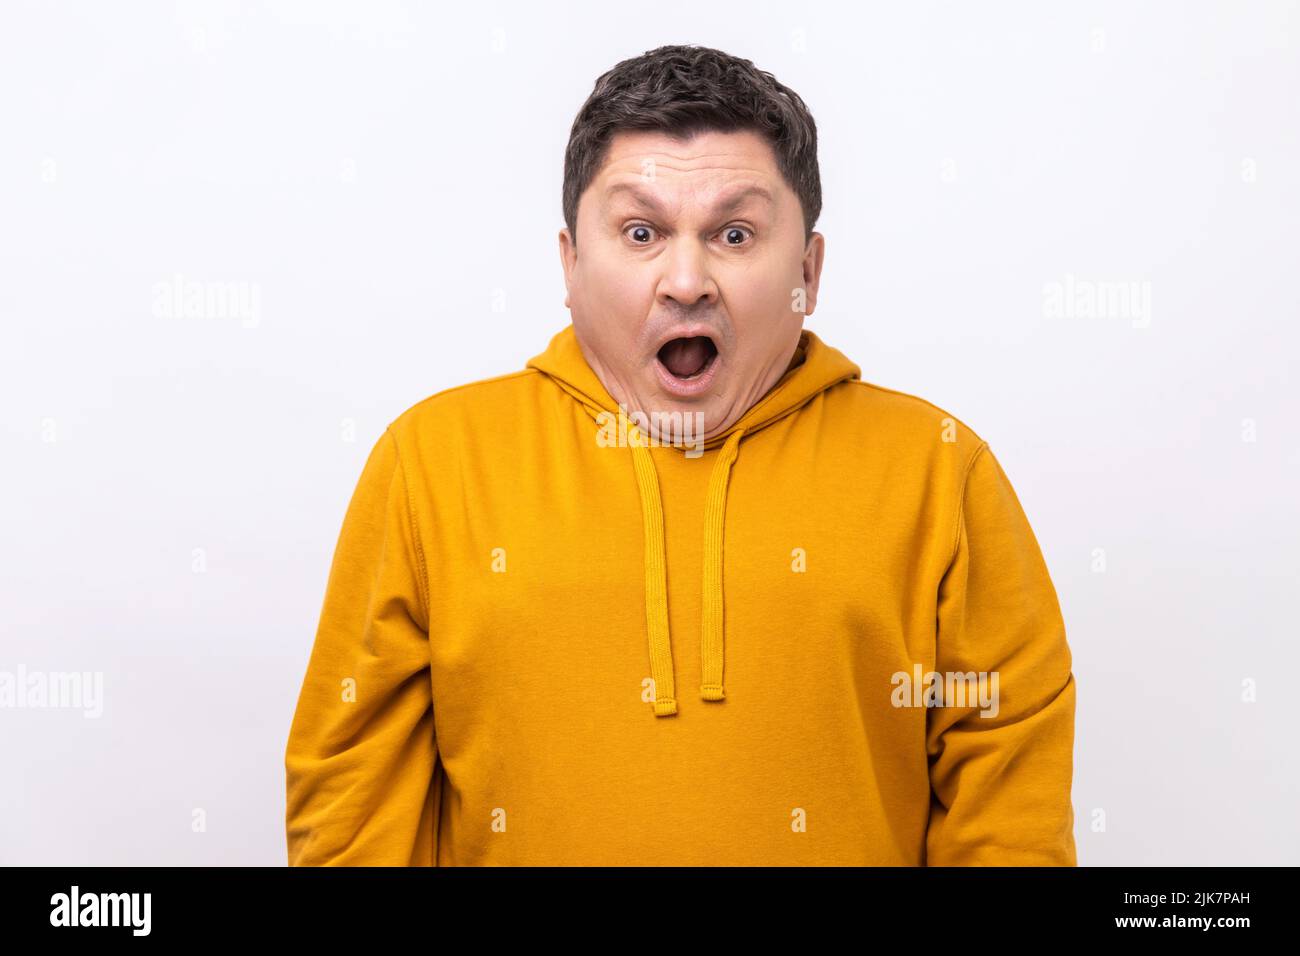 Portrait of excited man with open mouth and big amazed eyes, looking surprised and silly at camera, wondered expression, wearing urban style hoodie. Indoor studio shot isolated on white background. Stock Photo